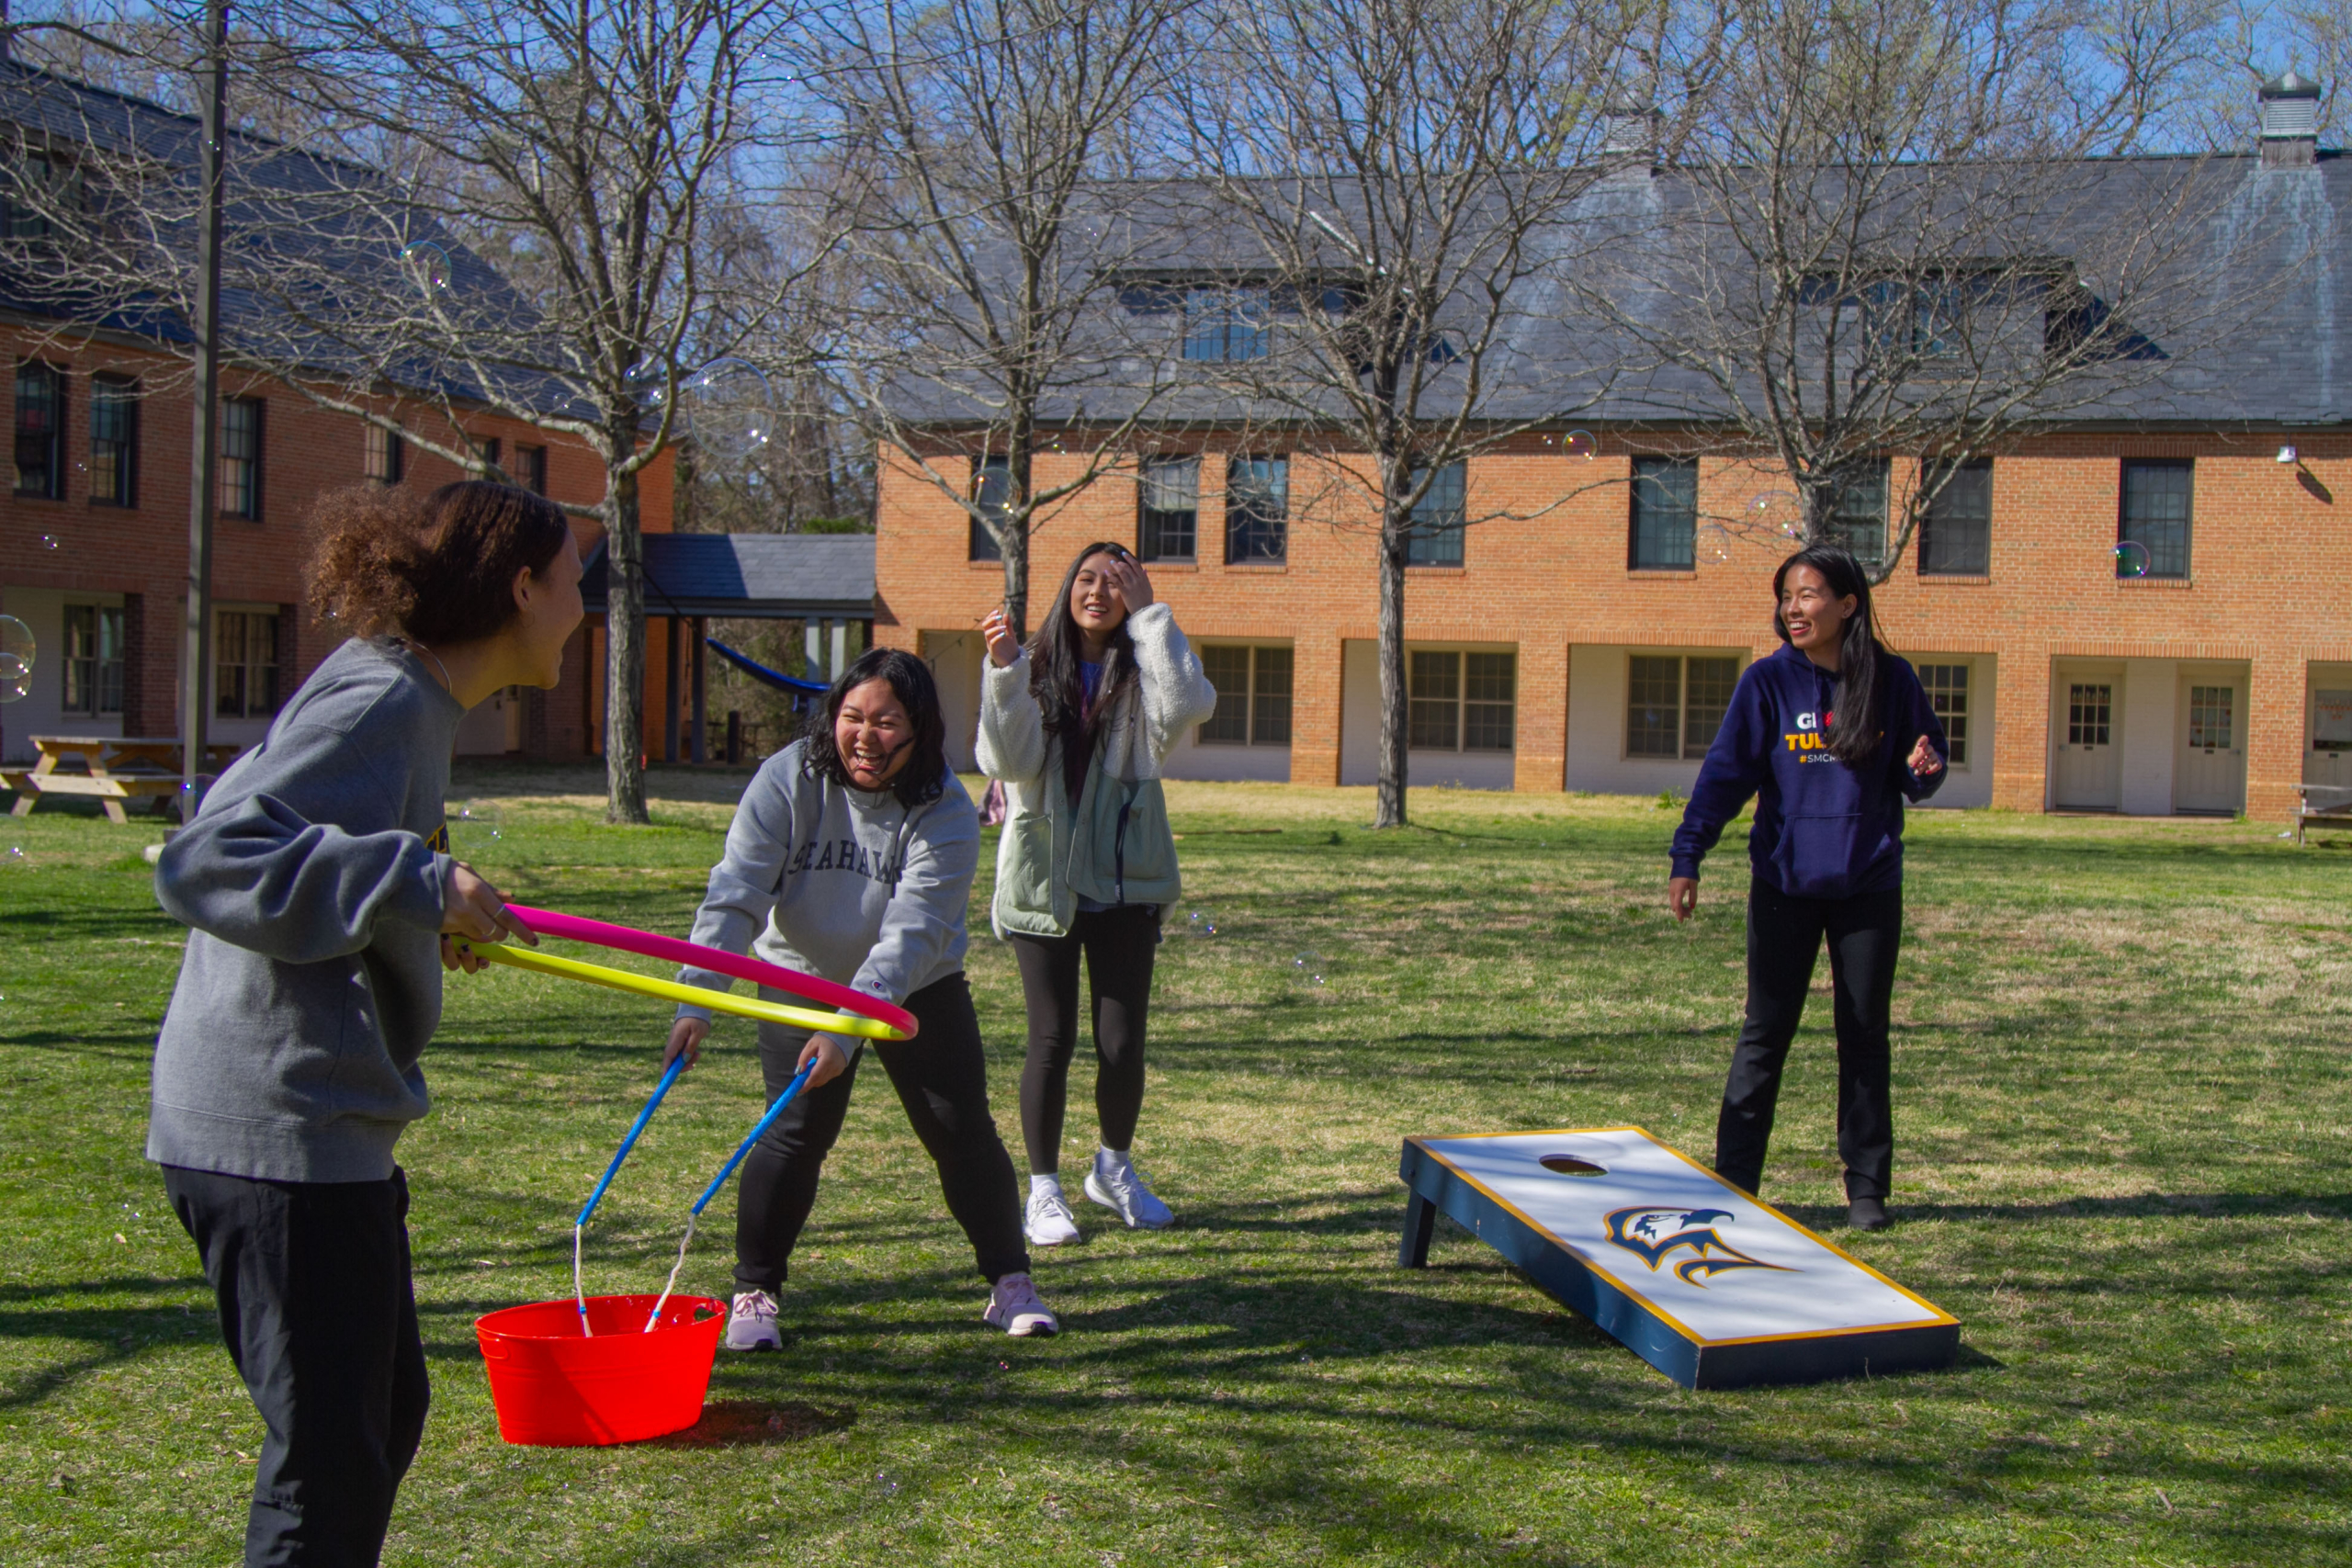 Four female students partake in fun activities like hula hoops, bubbles, and corn hole on the college lawn in front of a residential building